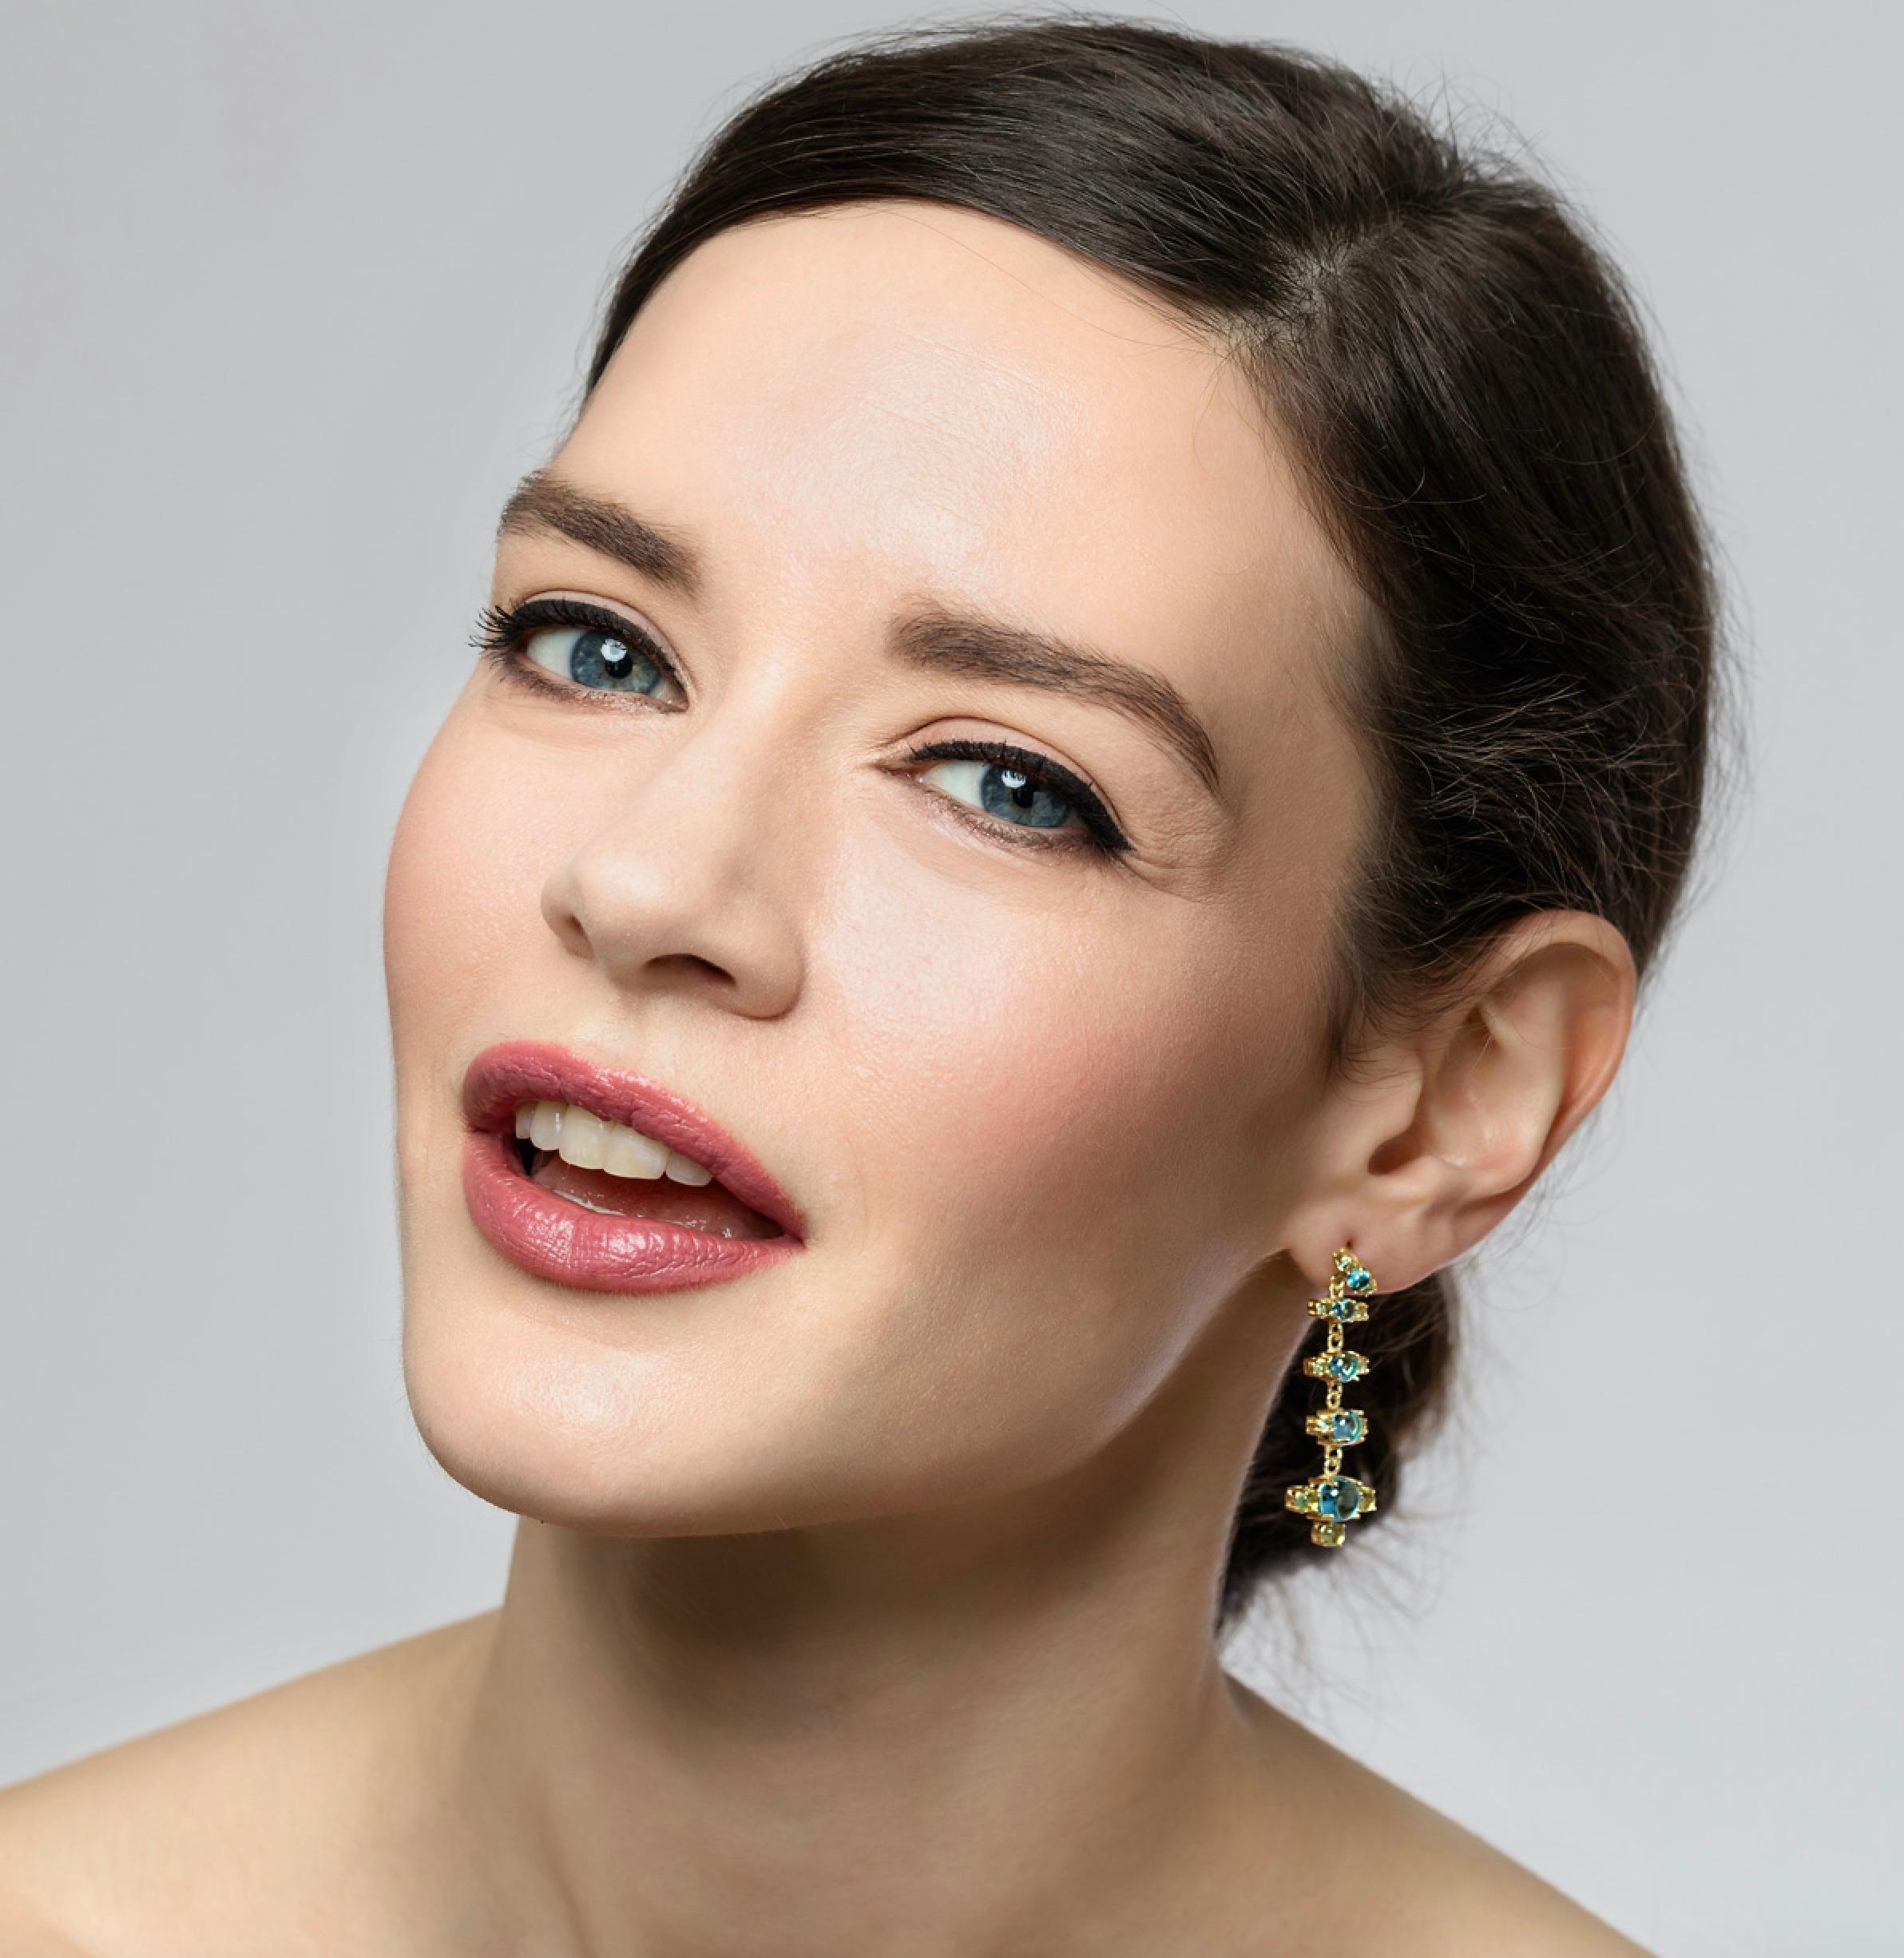 Our + Earrings in 18k yellow gold and brilliant coloured natural gemstone combinations are so feminine and chic. They come in three beautiful coloured combinations: Swiss Blue Topaz and green Peridot, green Peridot and Pink Tourmaline and Purple